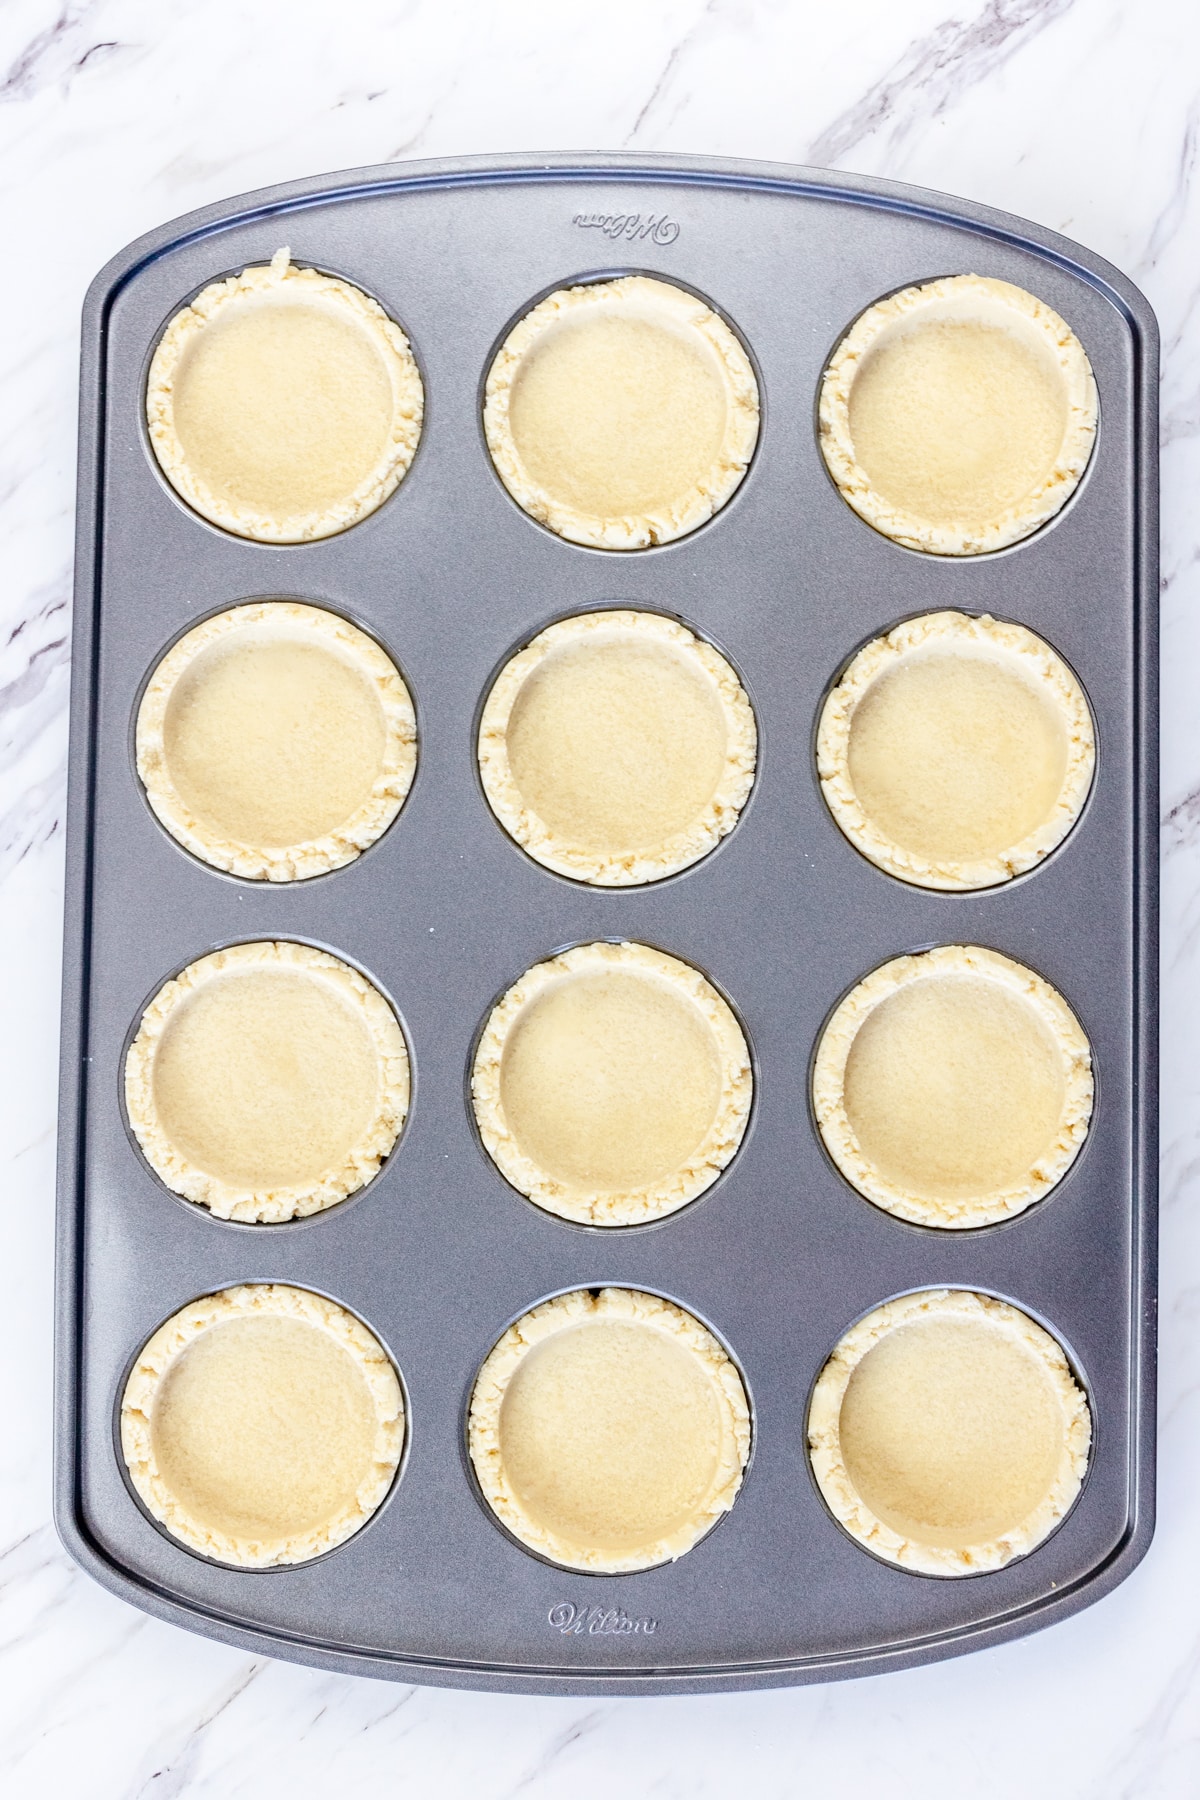 Top view of cobbler cookie bases in a muffin top baking tray.